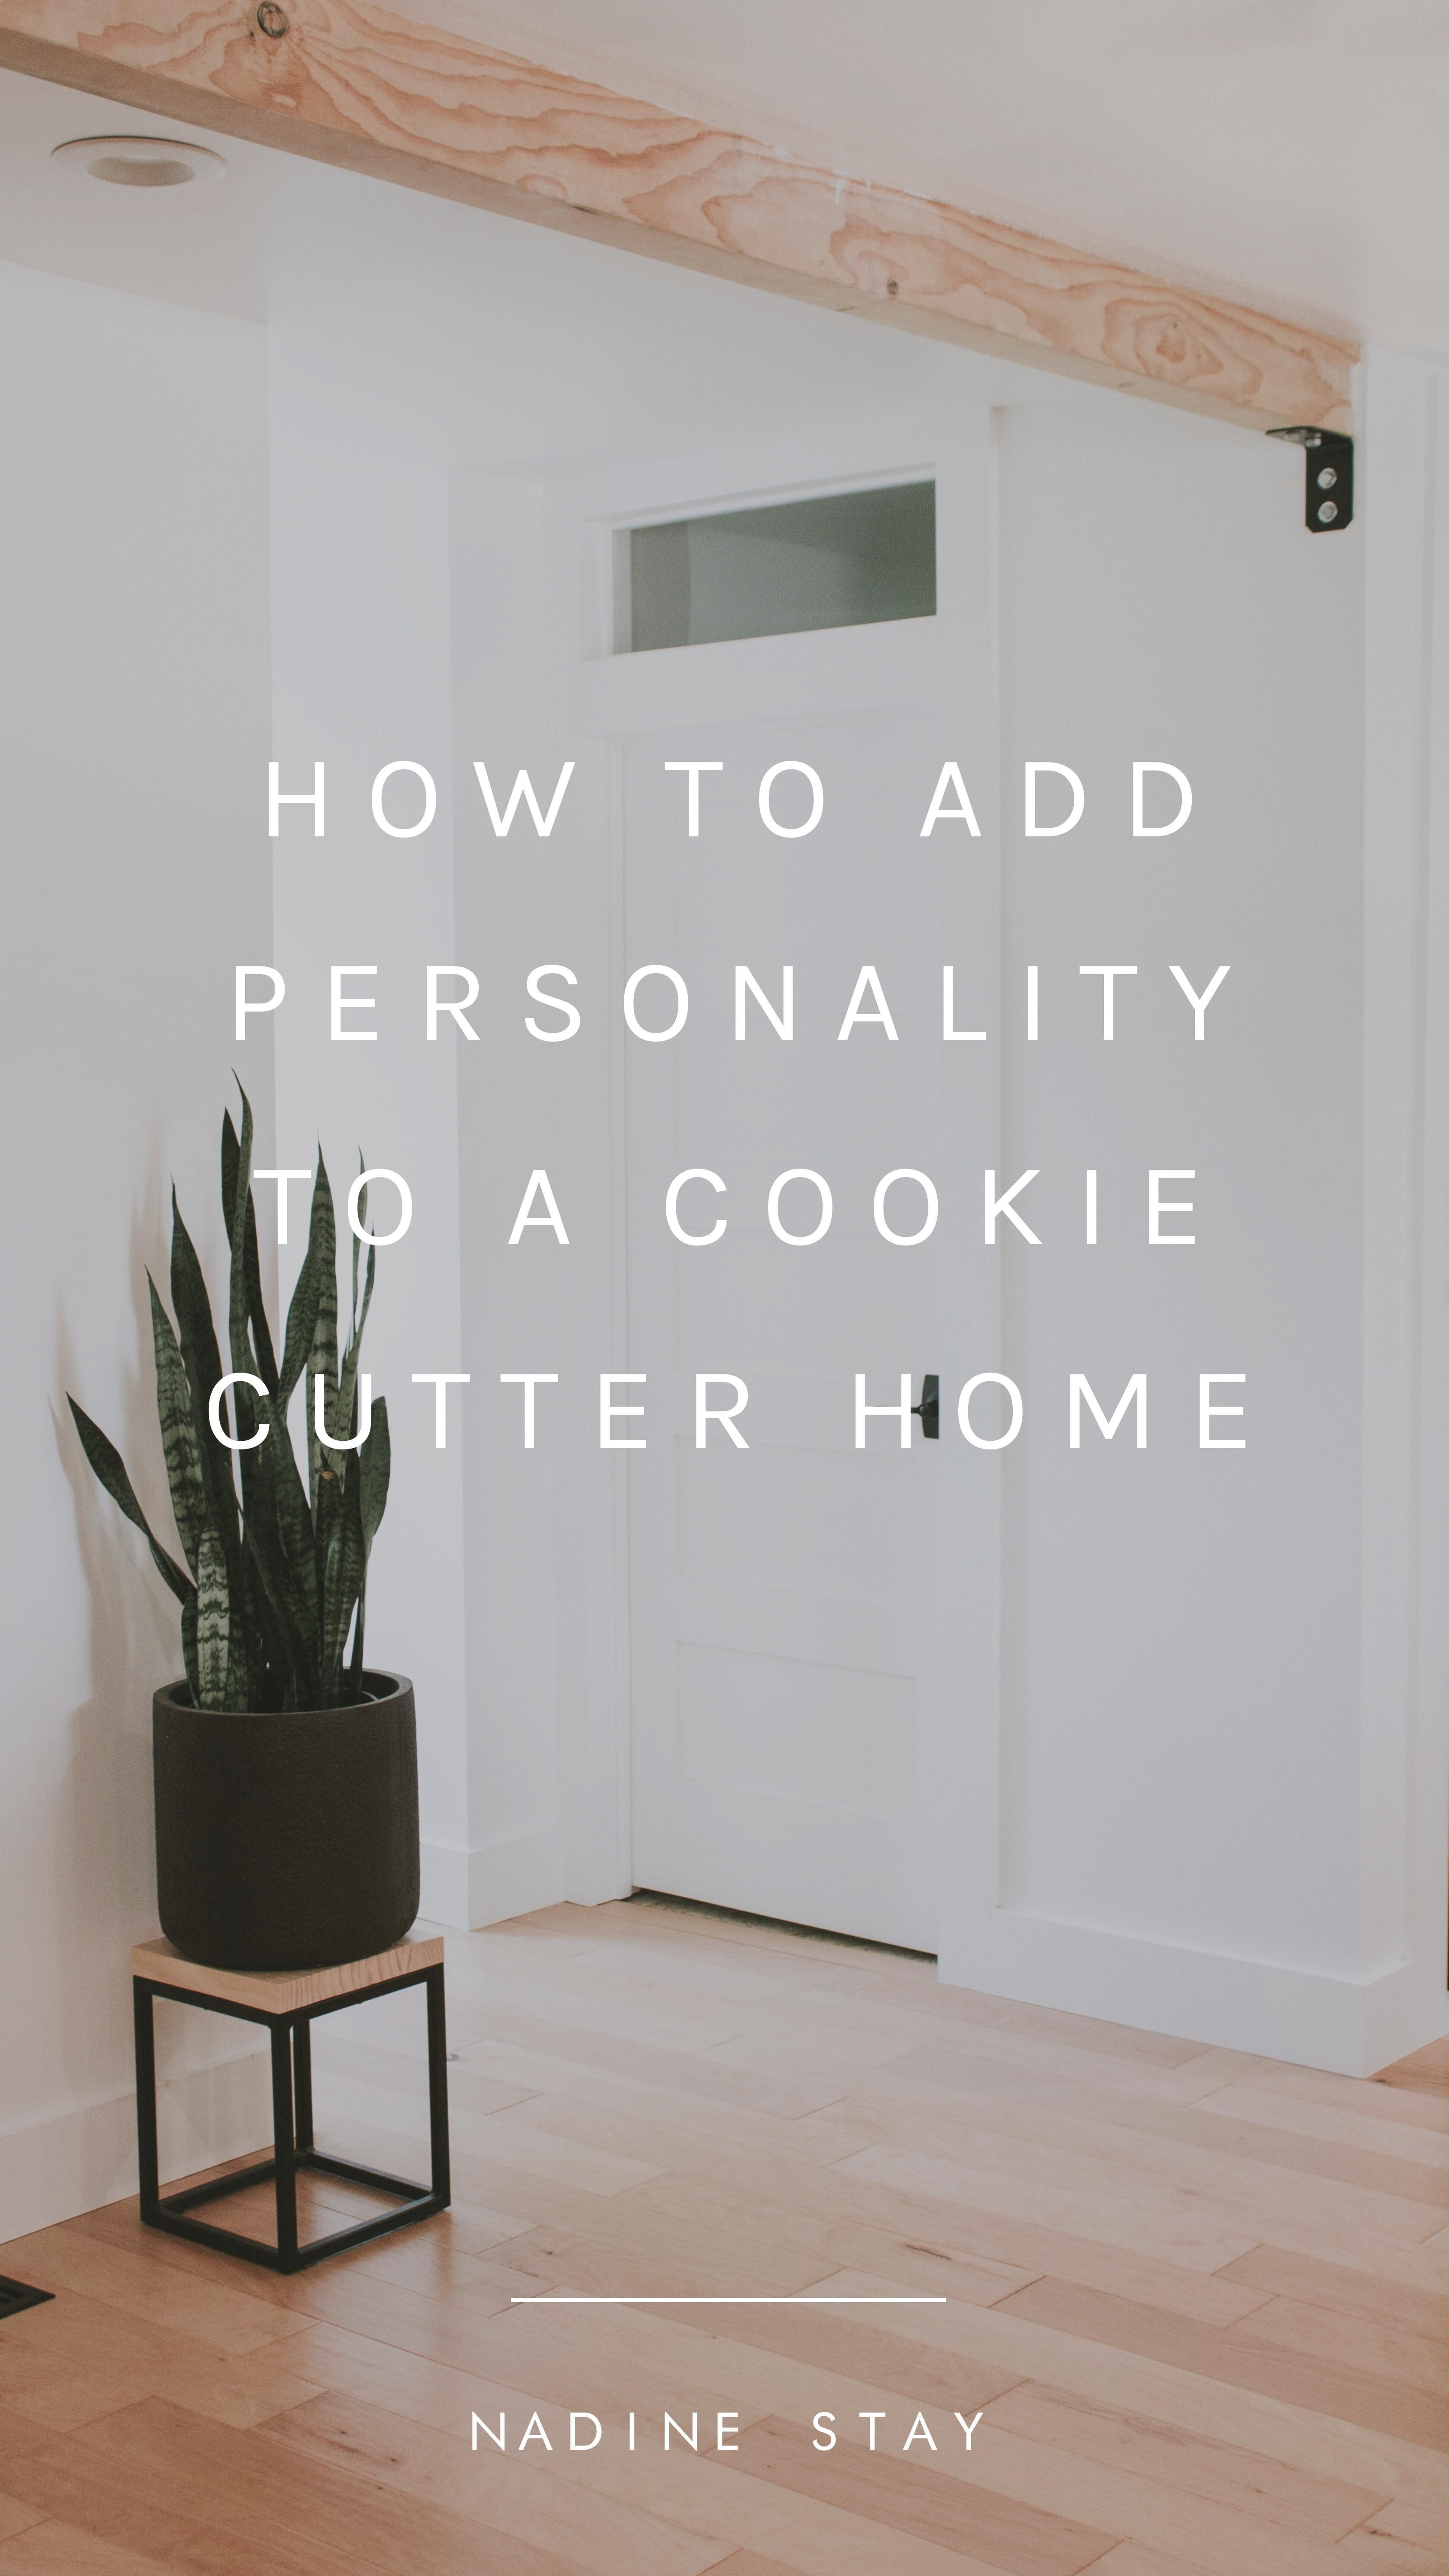 12 EXAMPLES OF HOW TO ADD PERSONALITY TO A COOKIE CUTTER HOME | Nadine Stay - 12 EXAMPLES OF HOW TO ADD PERSONALITY TO A COOKIE CUTTER HOME | Nadine Stay -   17 diy House updates ideas